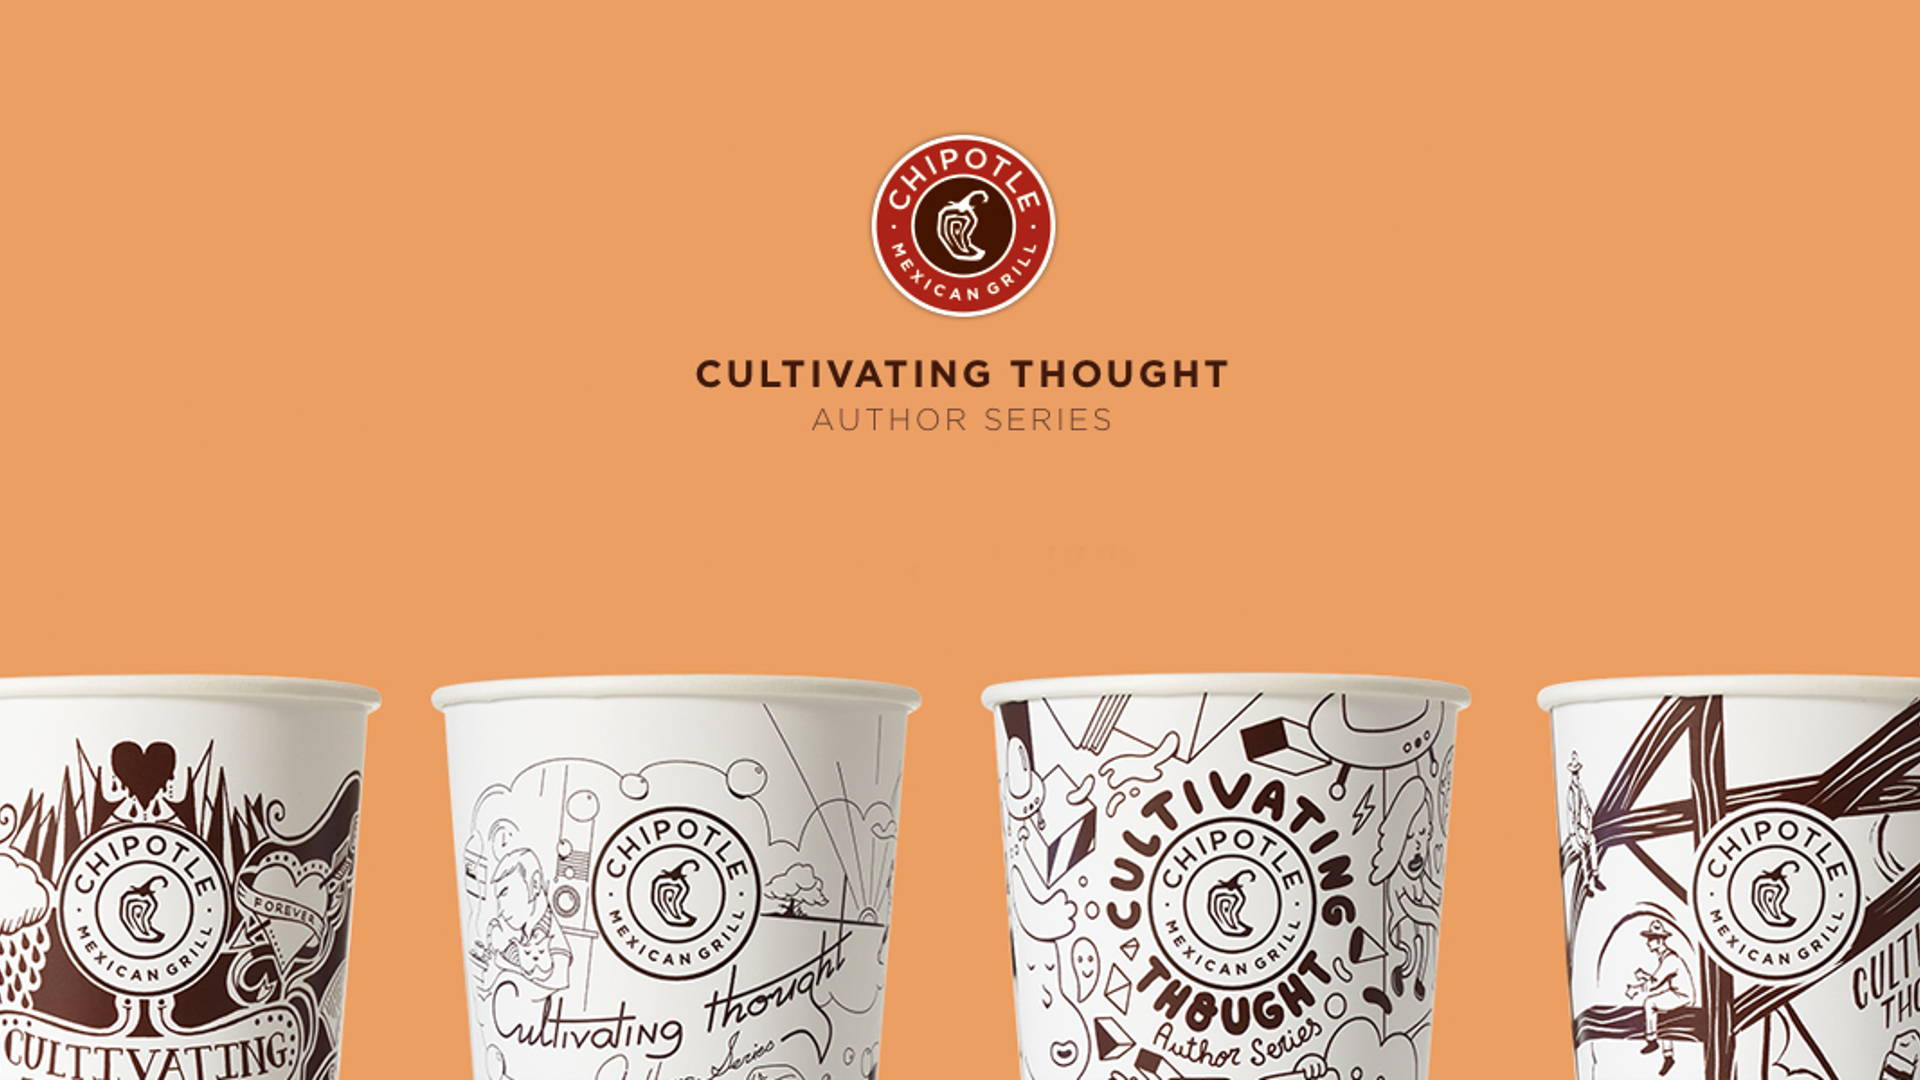 Featured image for The Cultivating Thought Author Series - Chipotle 